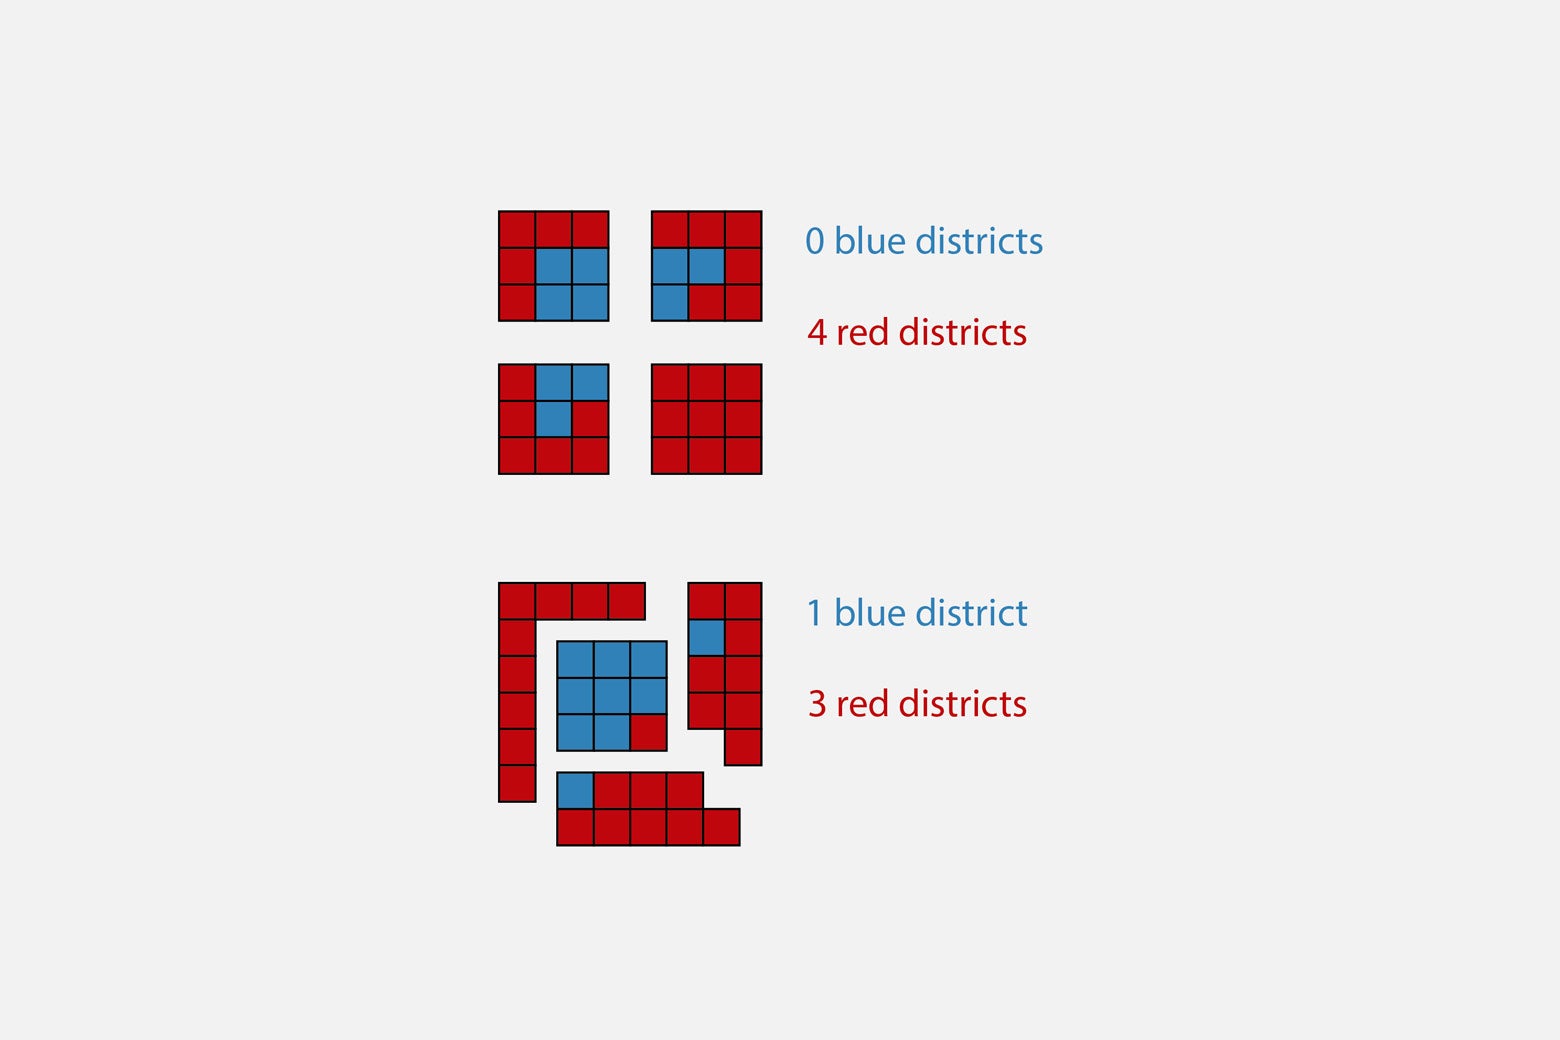 Top: Grid divided up so that it has 0 blue districts and 4 red districts. Bottom: Grid divided up so that it has 1 blue district and 3 red districts.